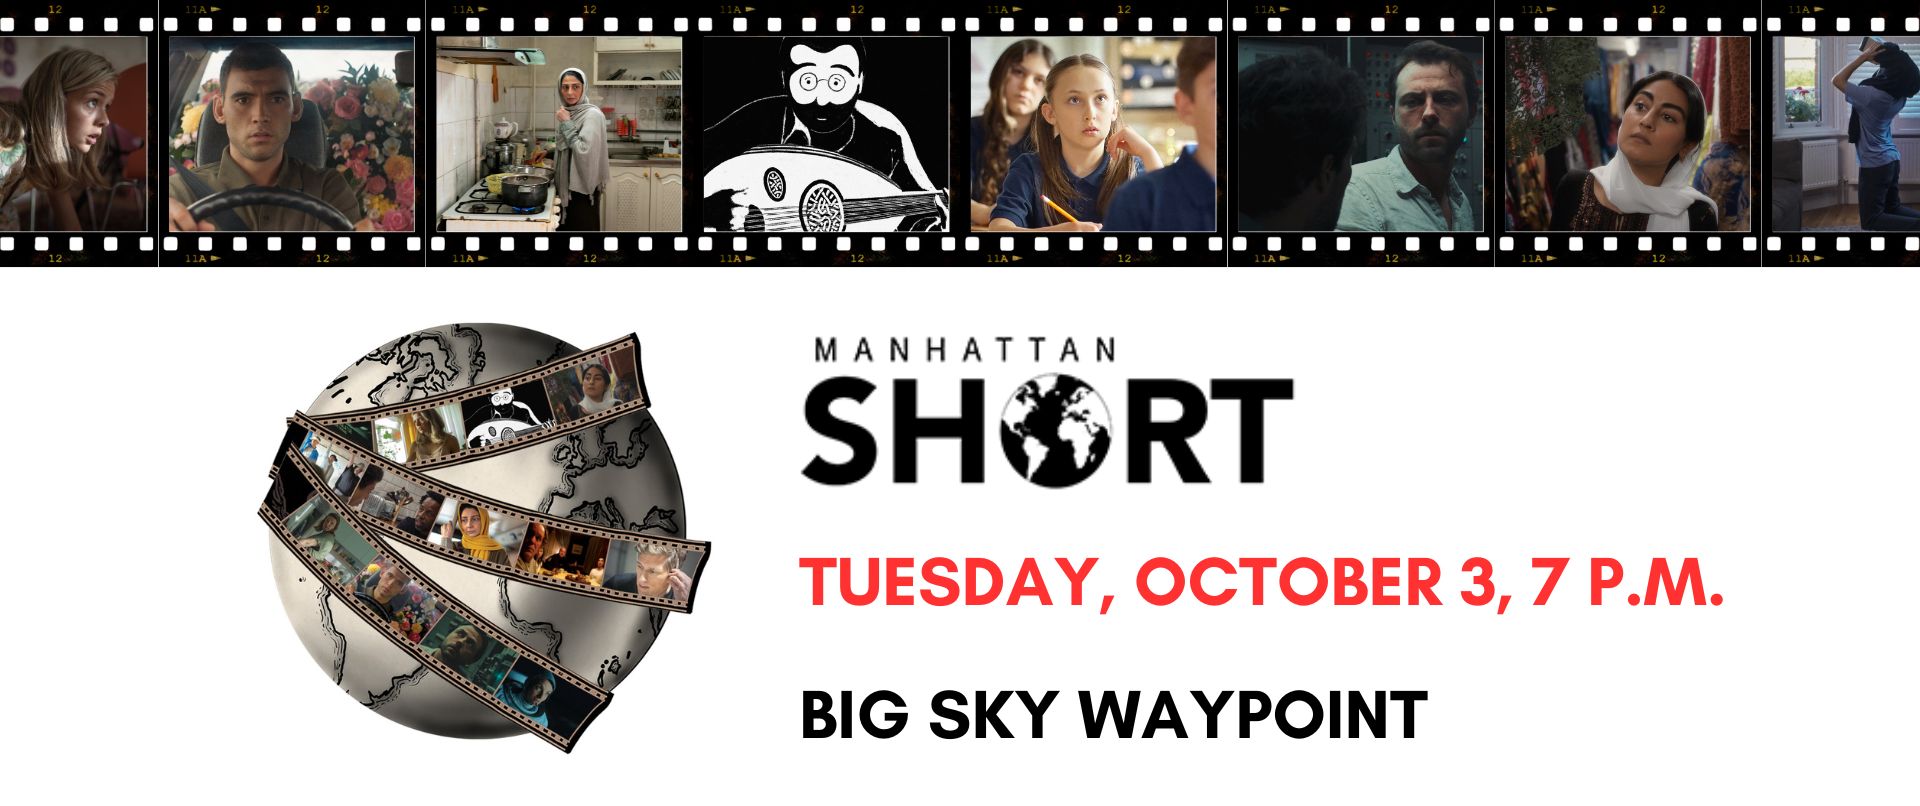 Event flyer for Manhattan Short film festival. The flyer at the top and bottom have rolls of film with the movie stills. The text reads, Manhattan Short, Tuesday, October 3, 7 pm. Big Sky Waypoint.